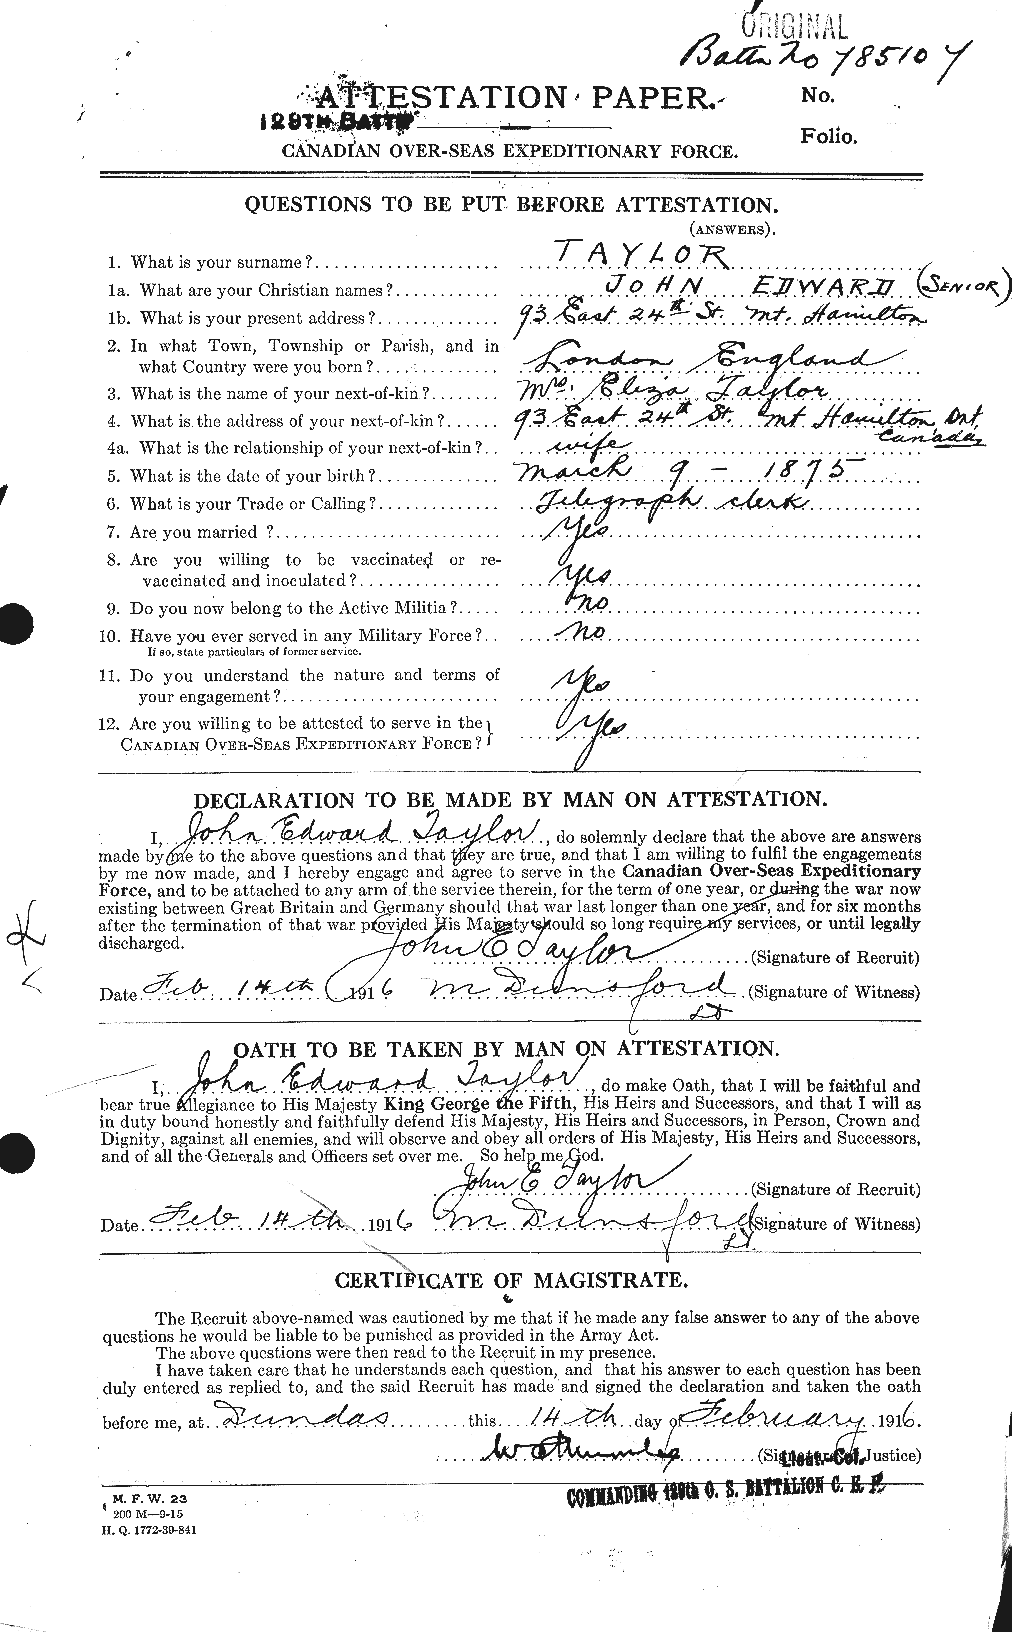 Personnel Records of the First World War - CEF 627073a